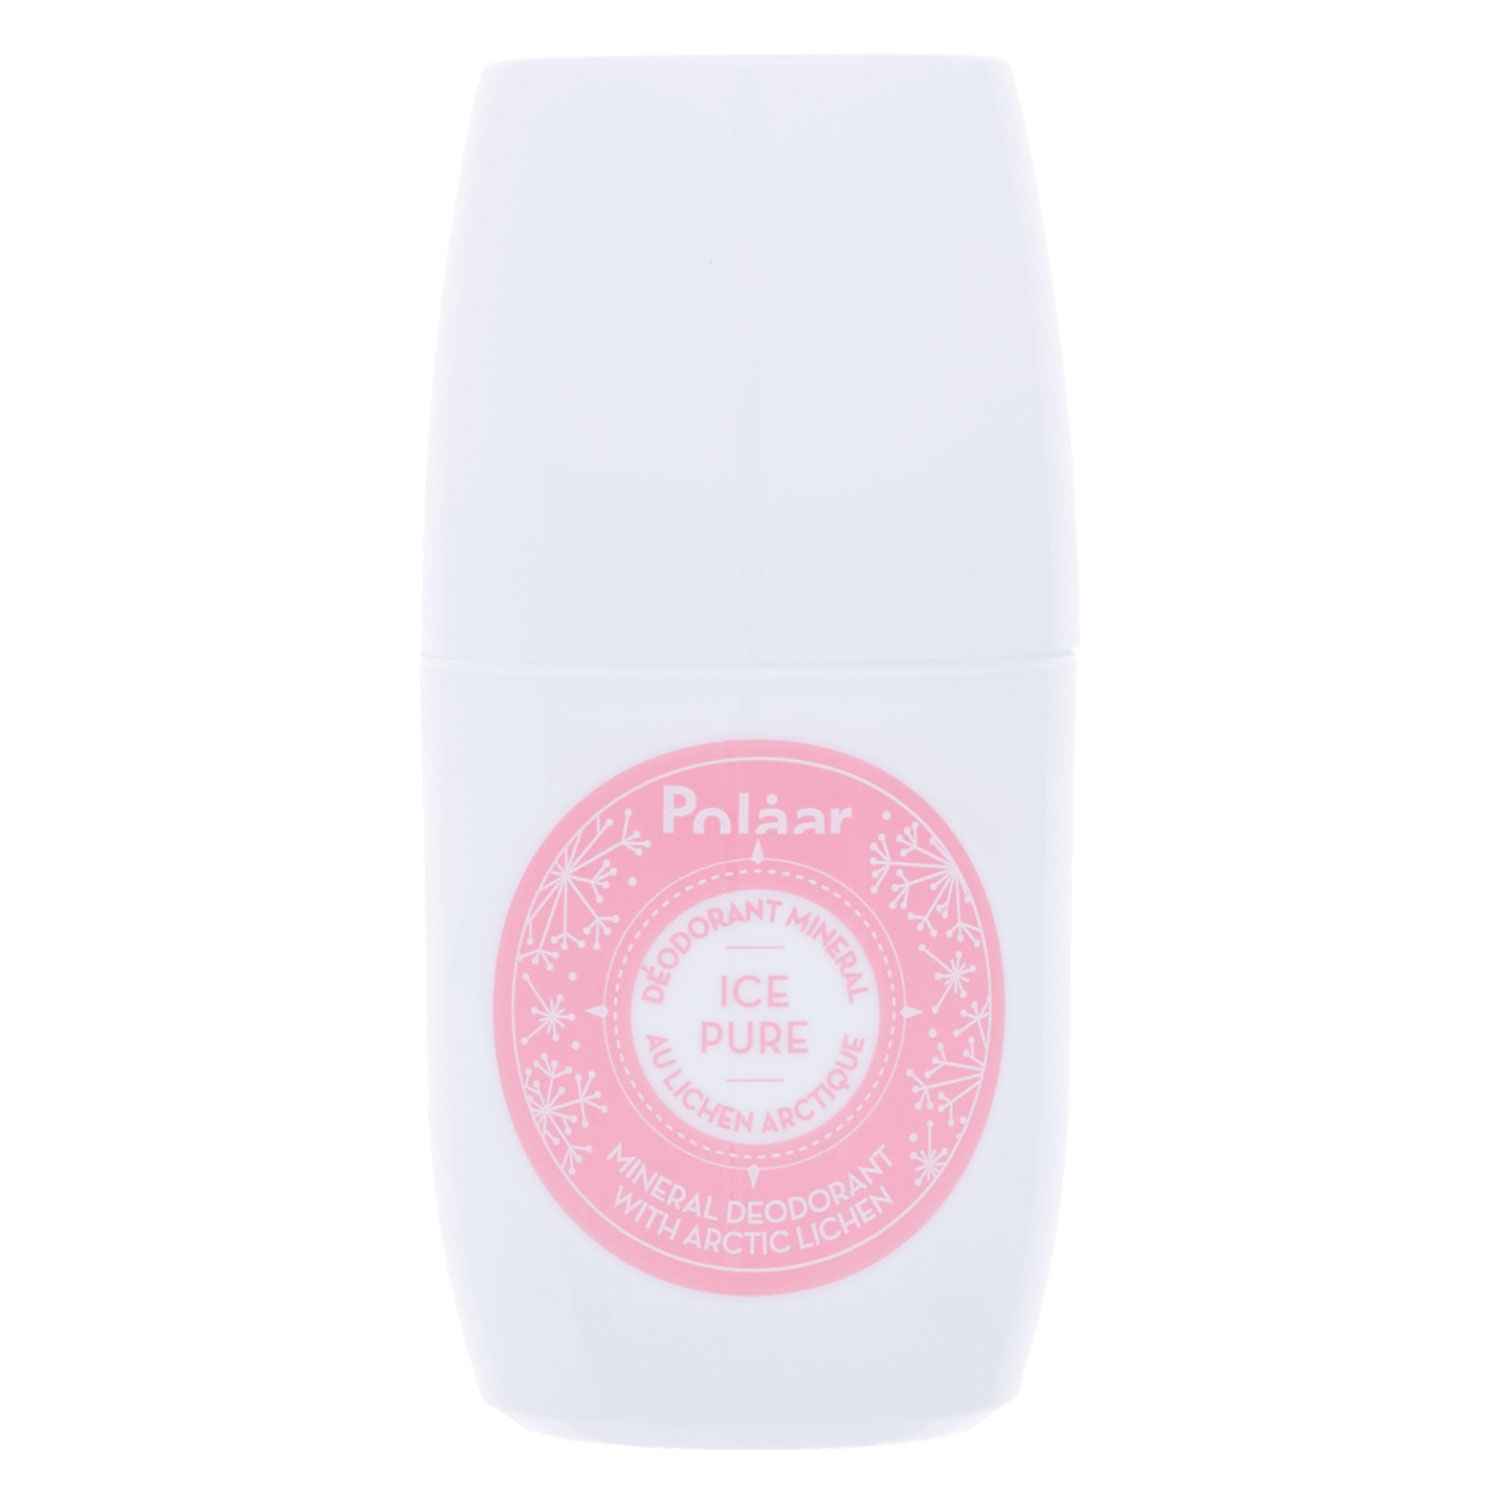 Product image from Polaar - Ice Pure Mineral Deodorant